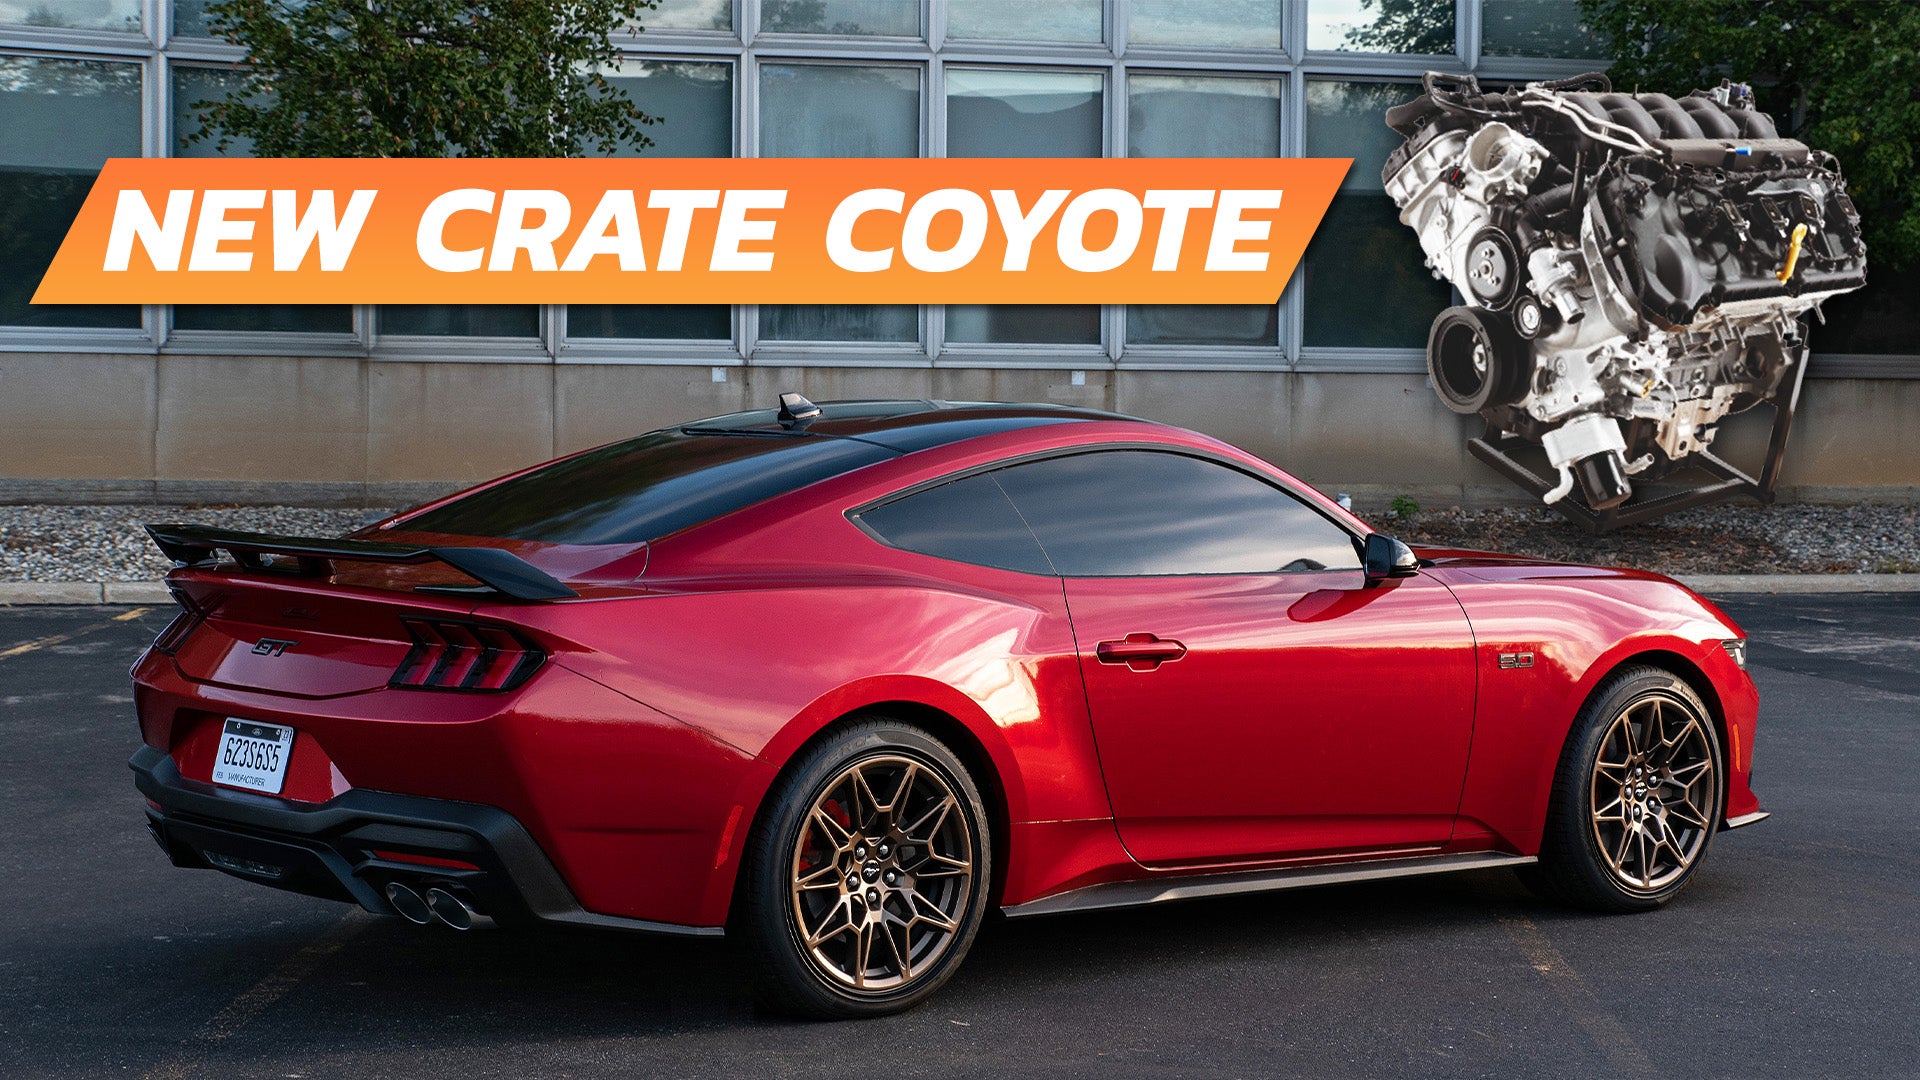 The 2024 Ford Mustang GT now comes equipped with the brand new Coyote V8 engine available as a crate engine option.